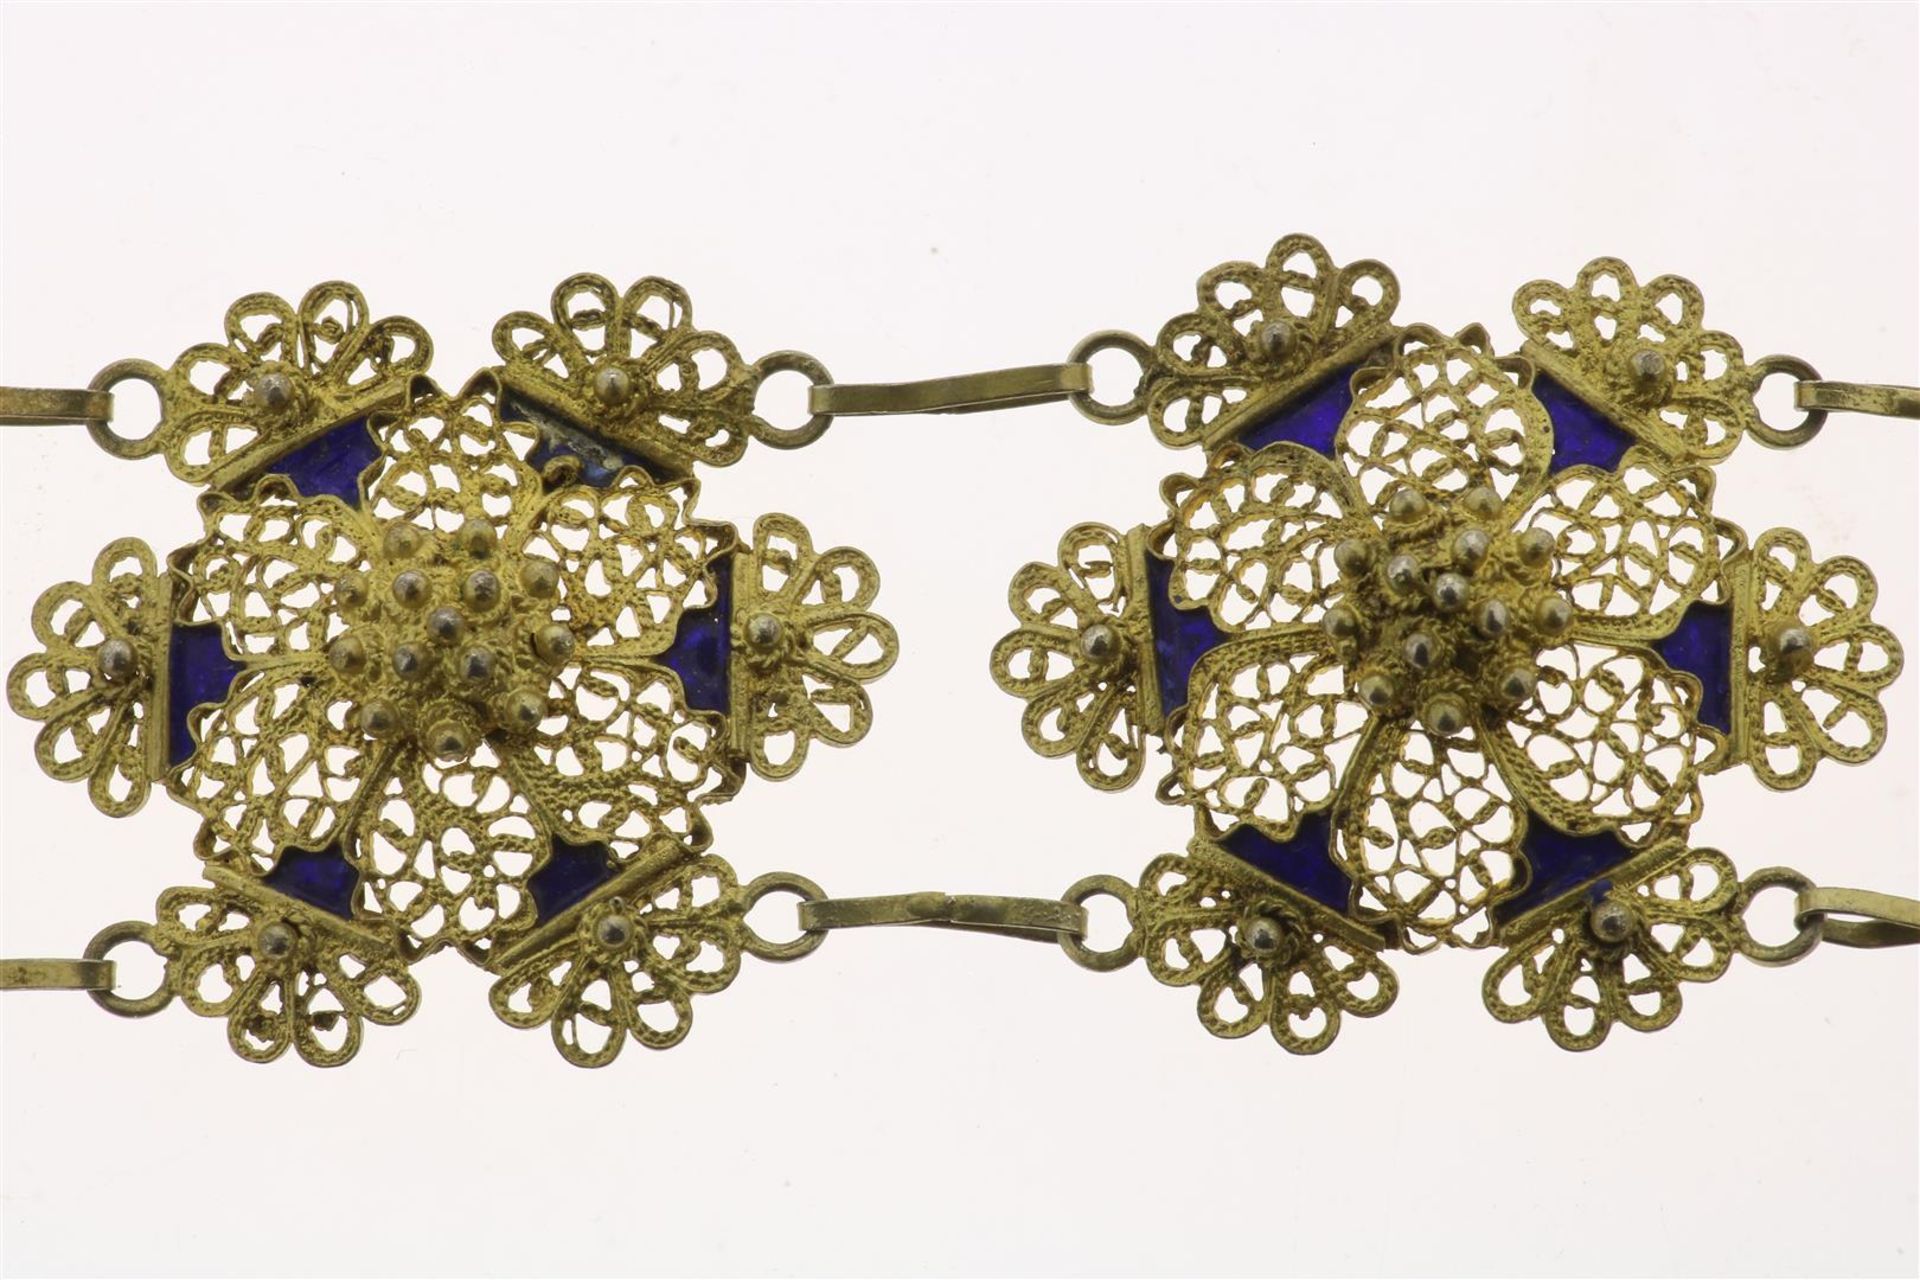 Yellow gold filigree bracelet, with rosettes inlaid with blue enamel, below legal weight, 19th